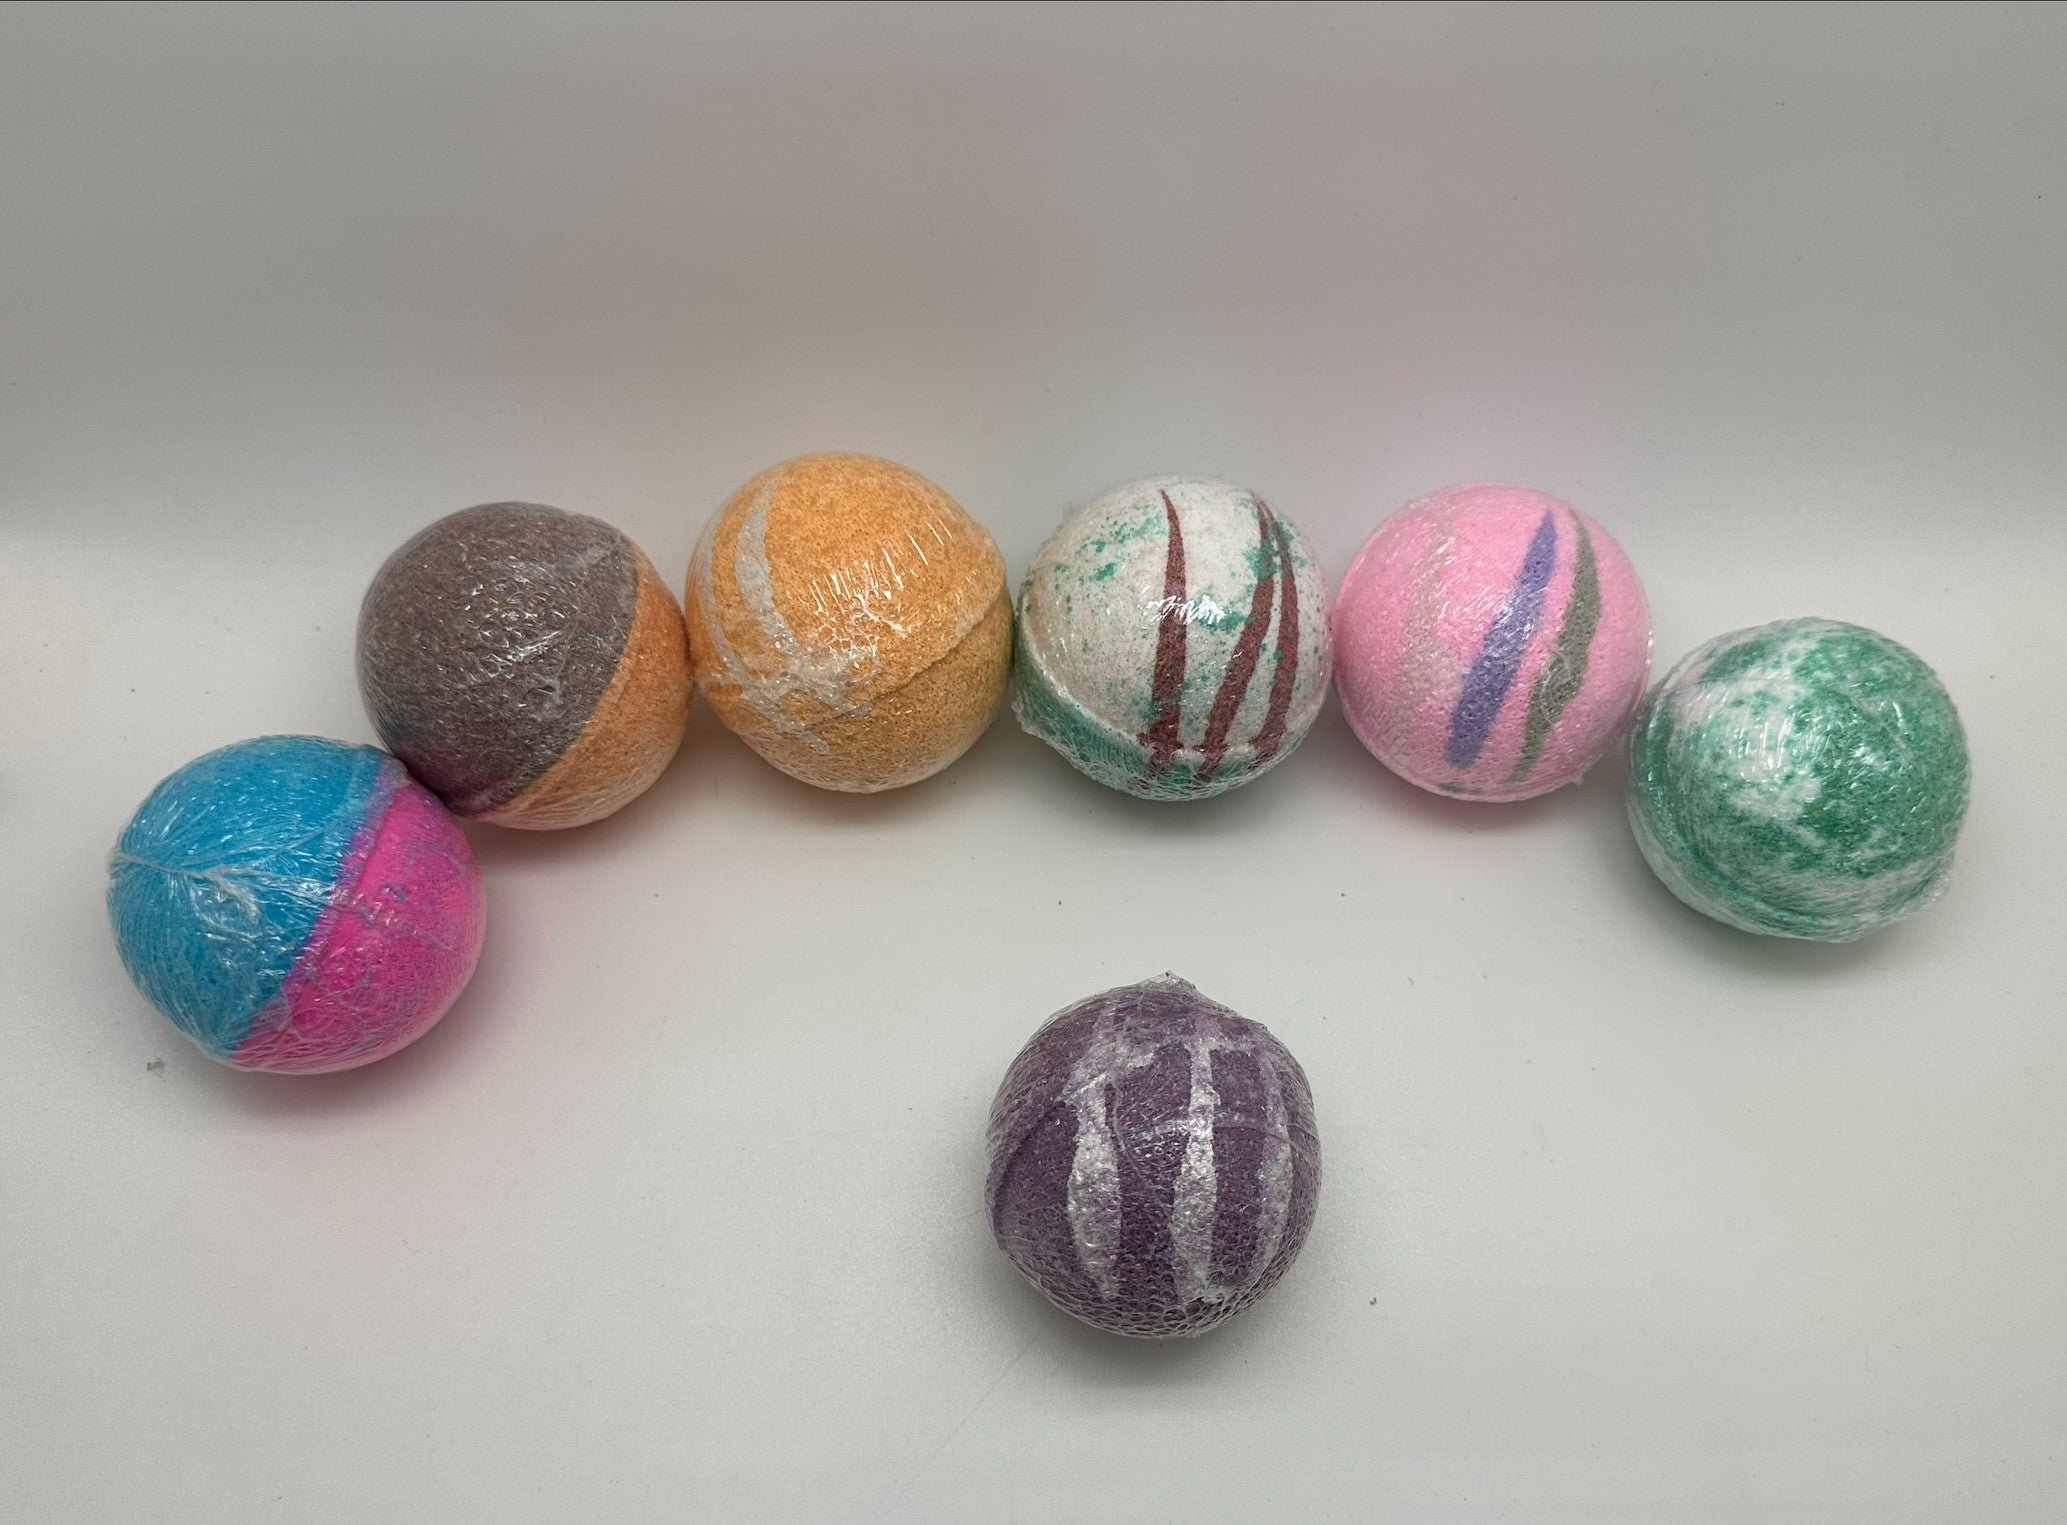 The Ultimate Guide to Bath Bombs - MG Bath Products